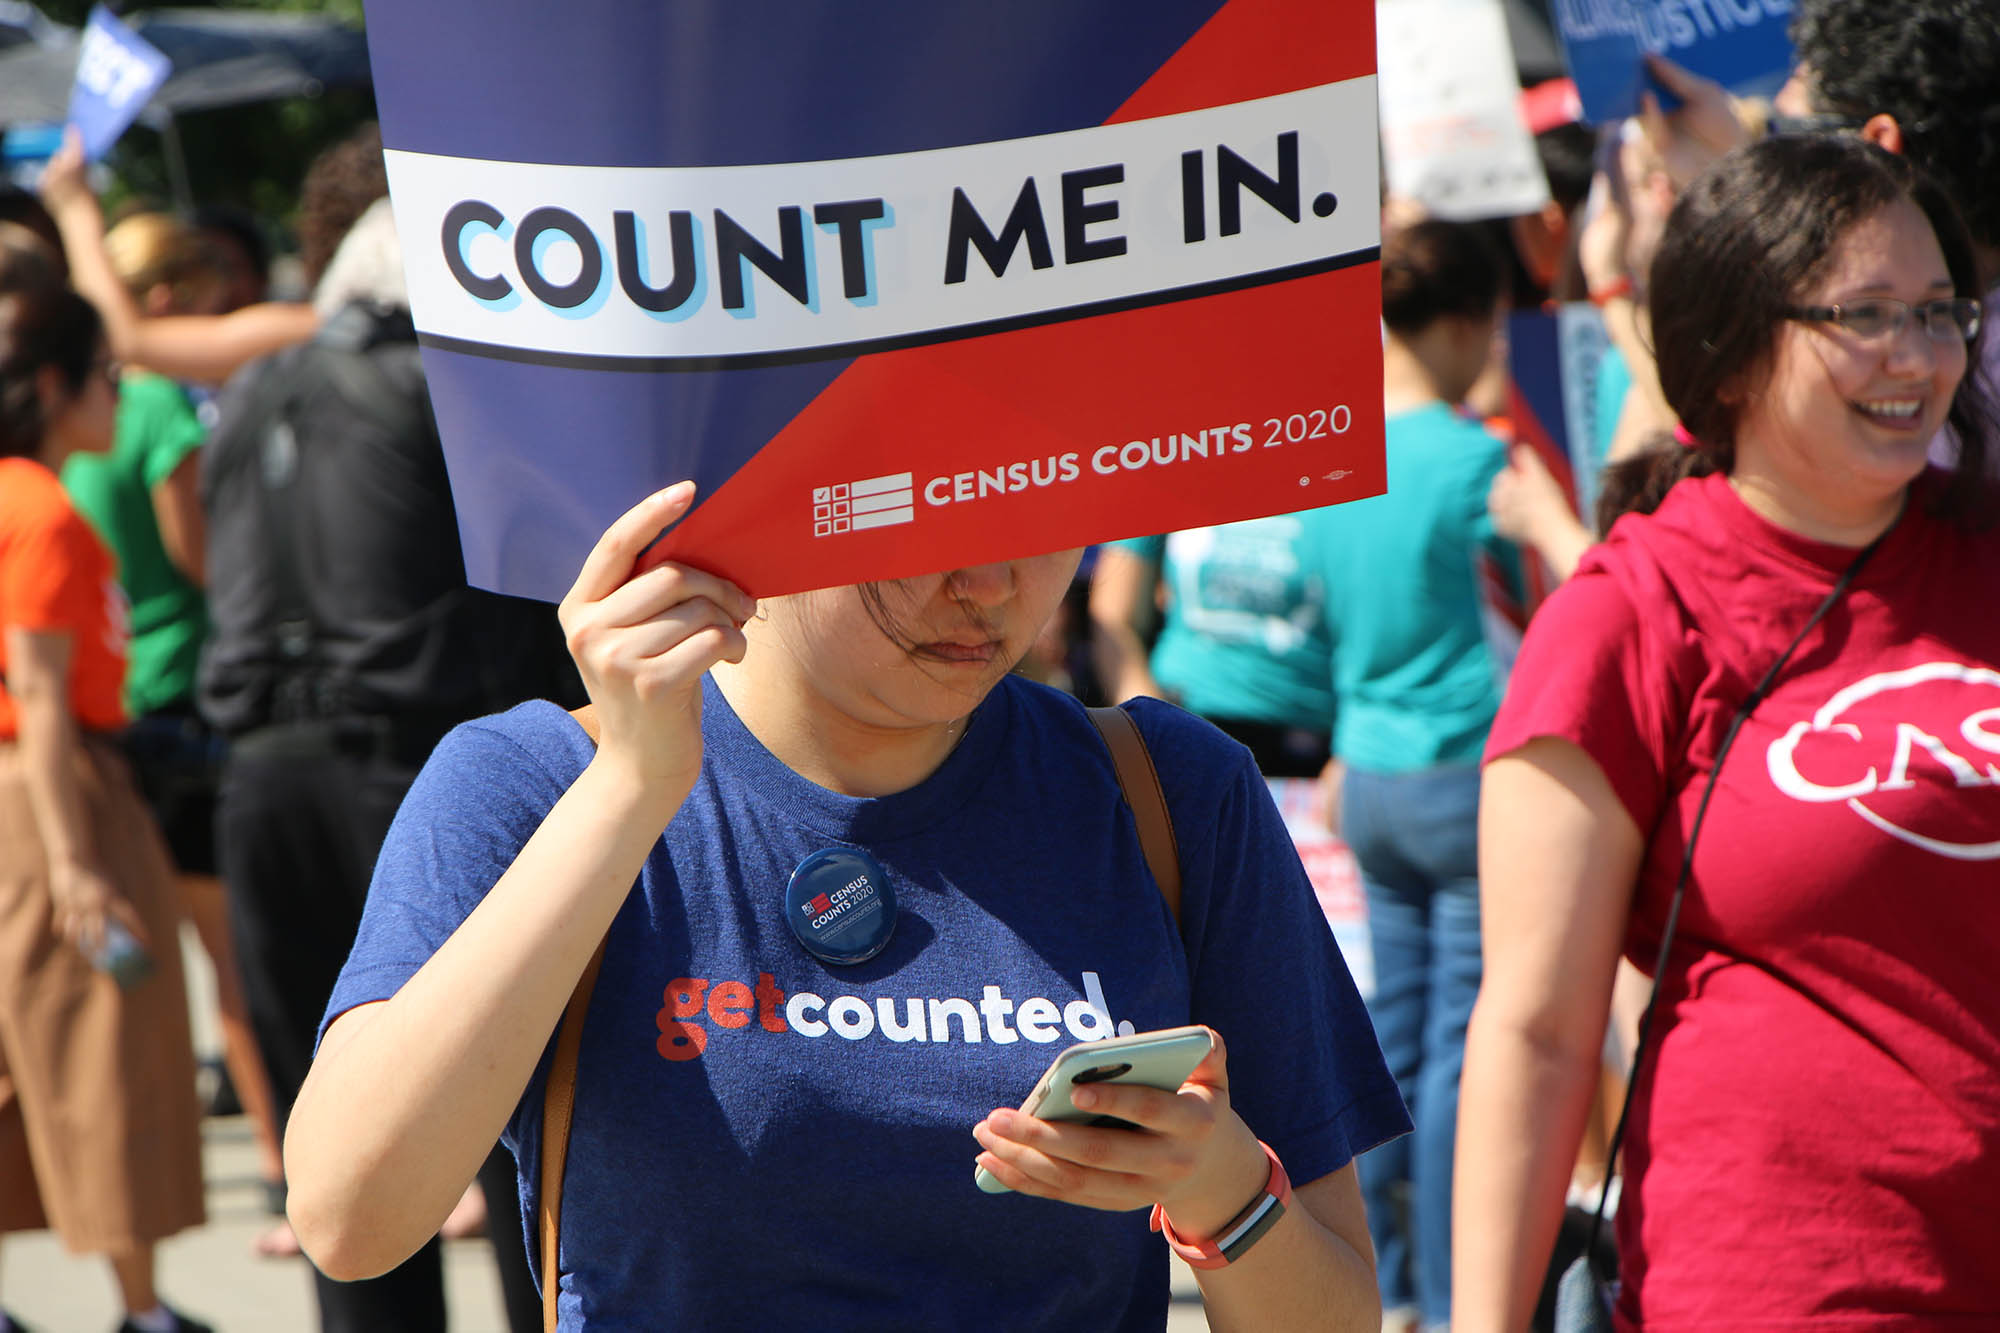 Census studied citizenship question even after losing in Supreme Court